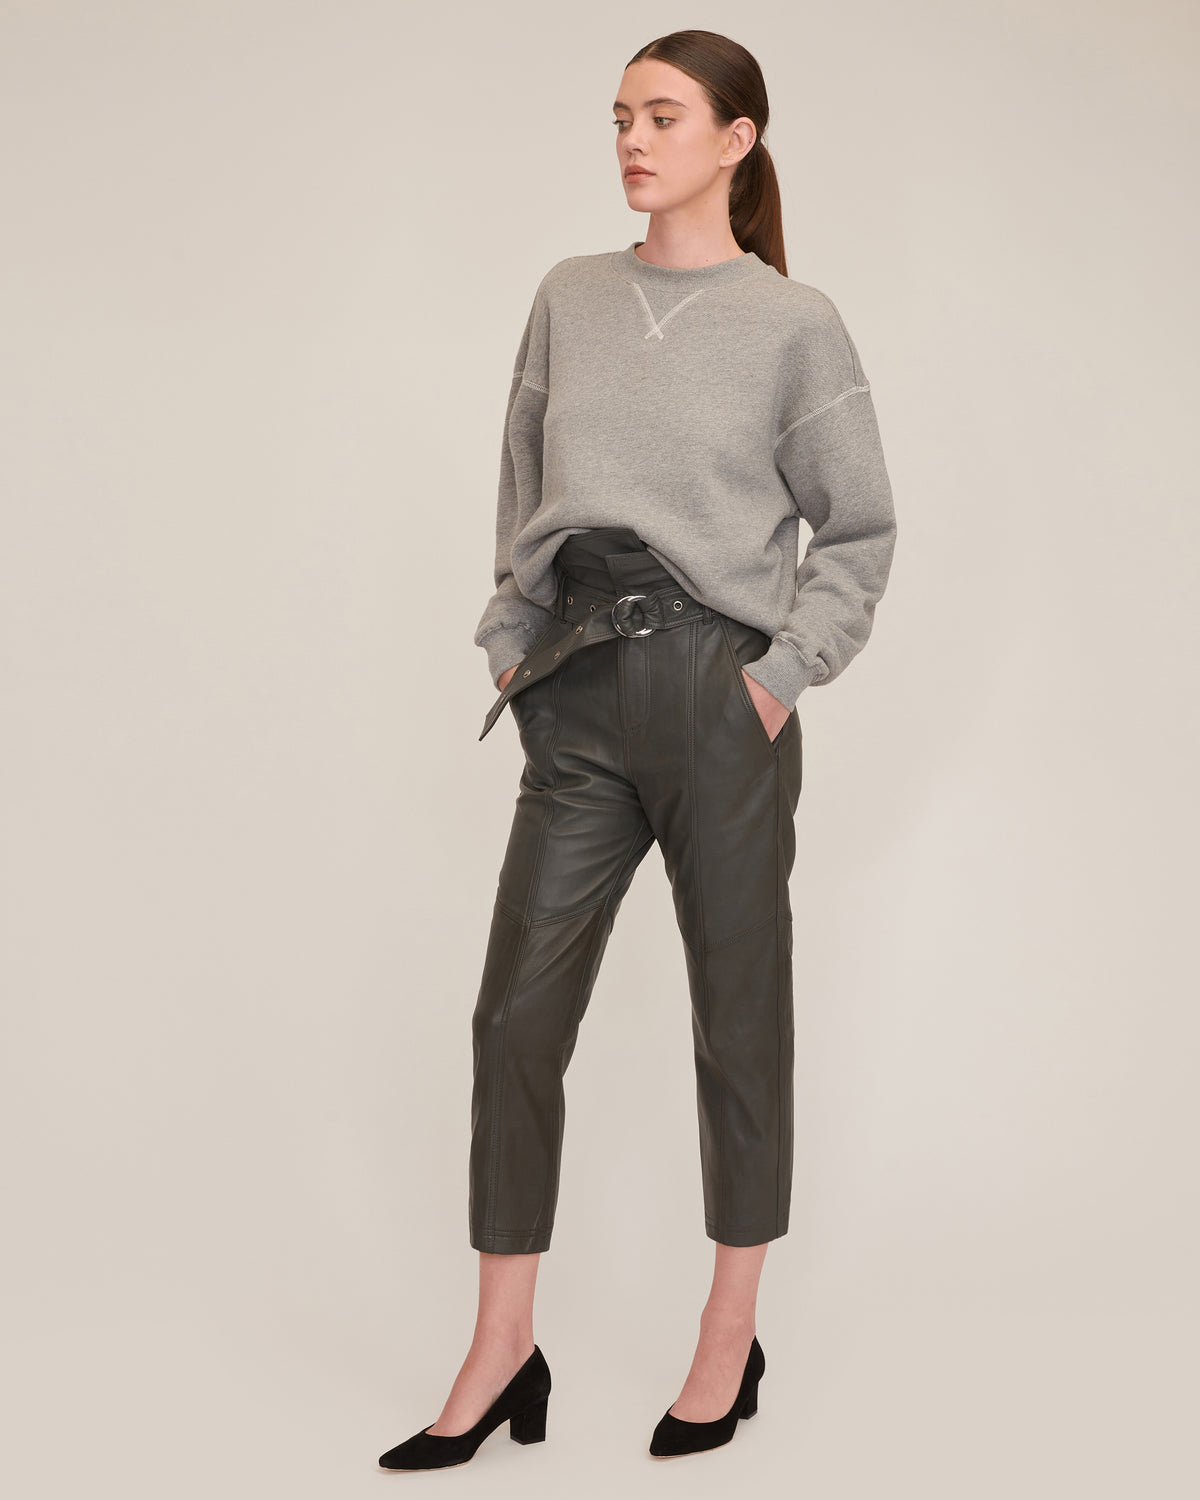 Anniston Leather Pant in Charcoal | MARISSA WEBB